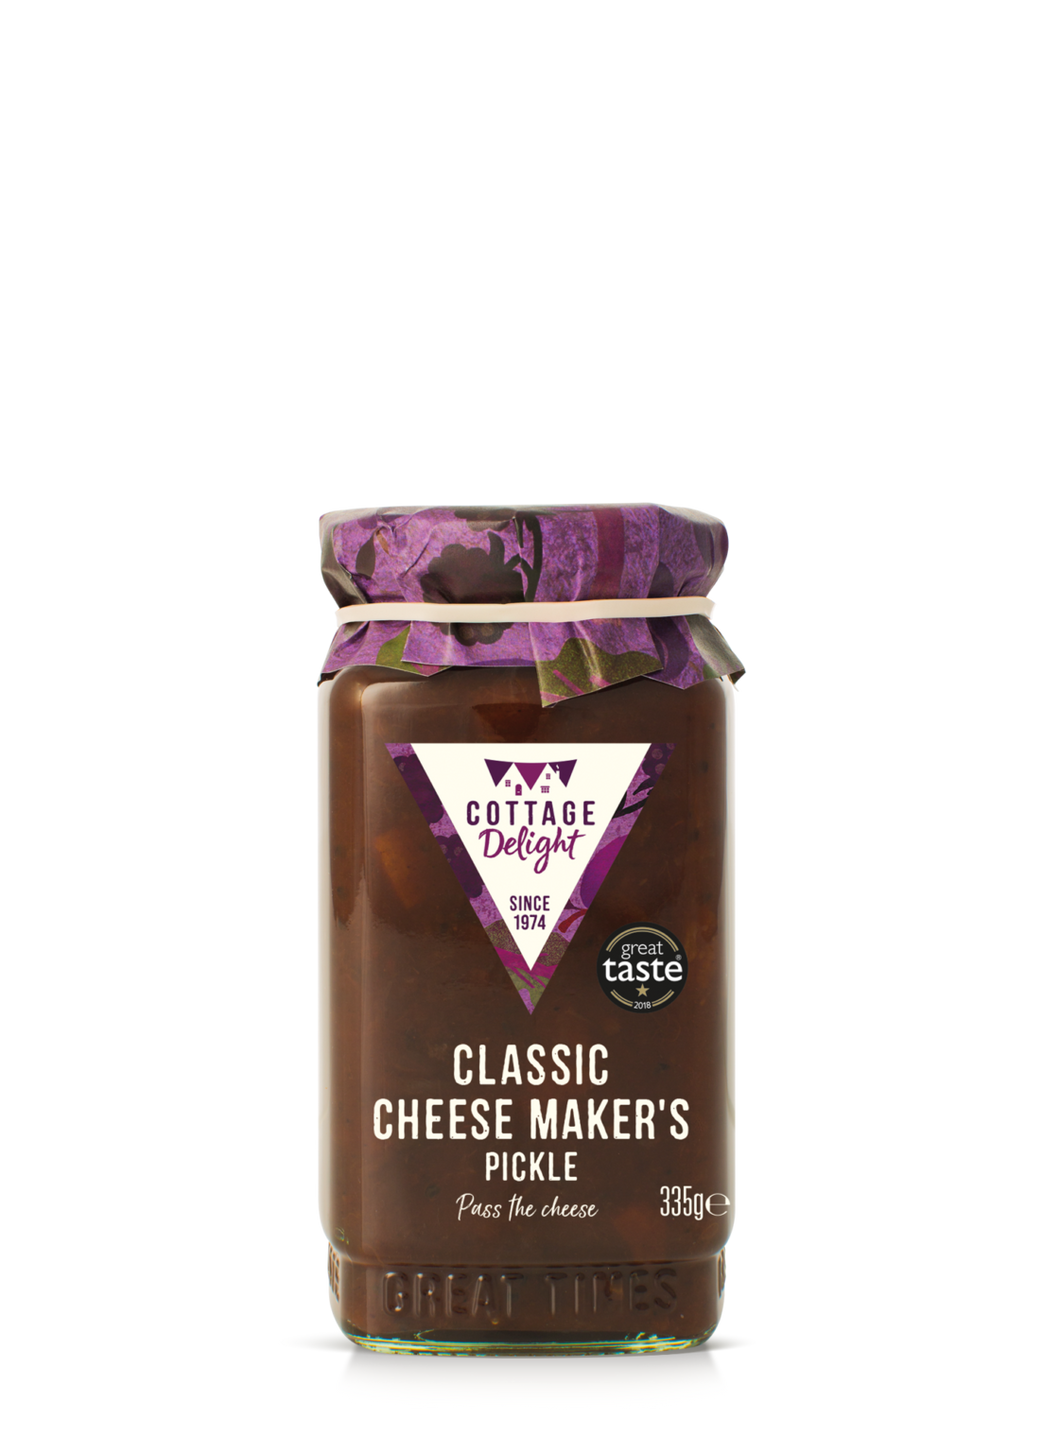 Classic Cheese makers Pickle